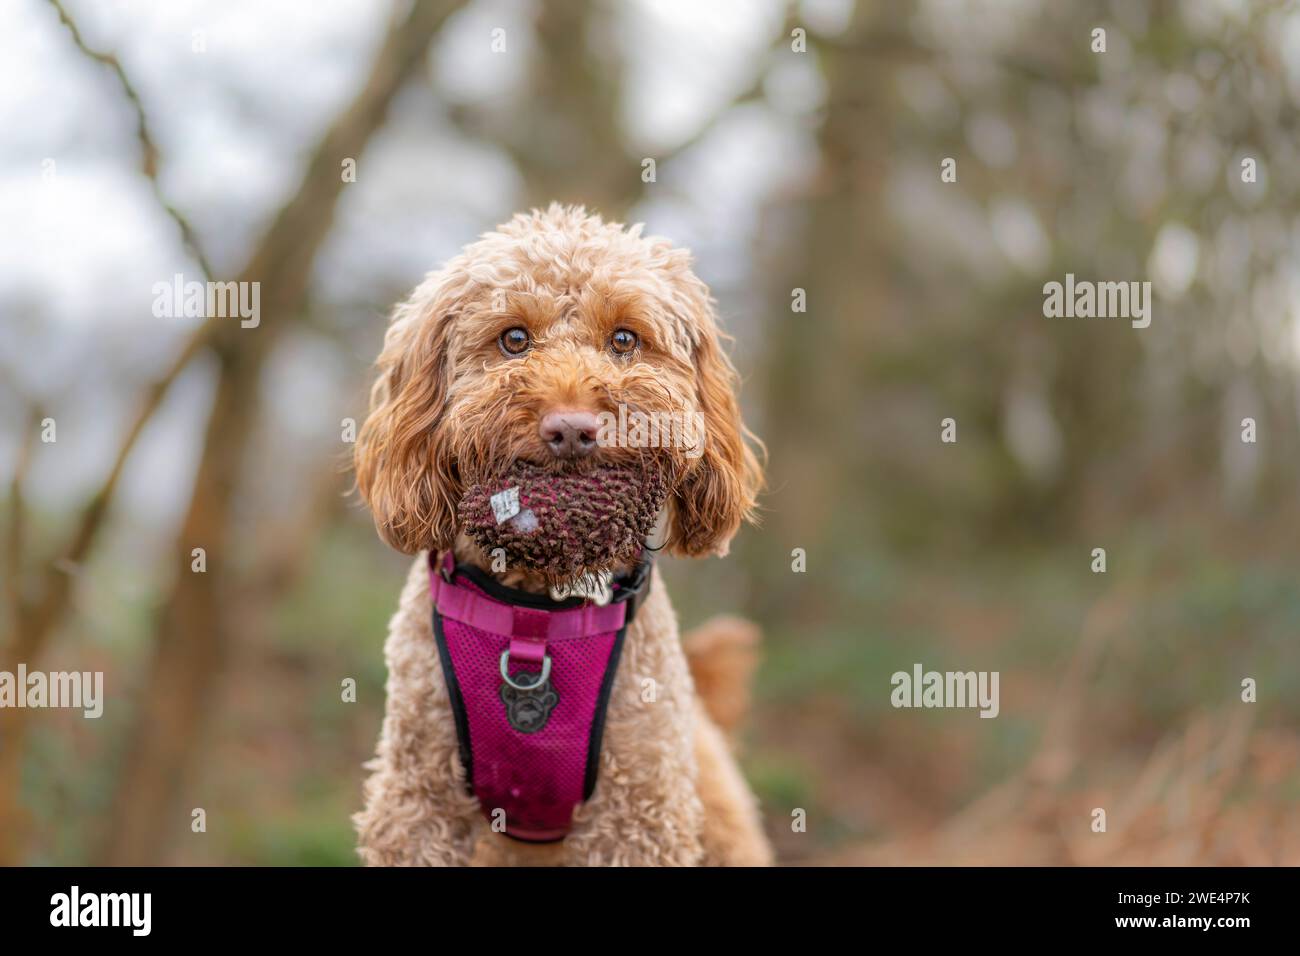 Close up front view of a cockerpoo dog with a fluffy toy in her mouth staring ahead. Stock Photo